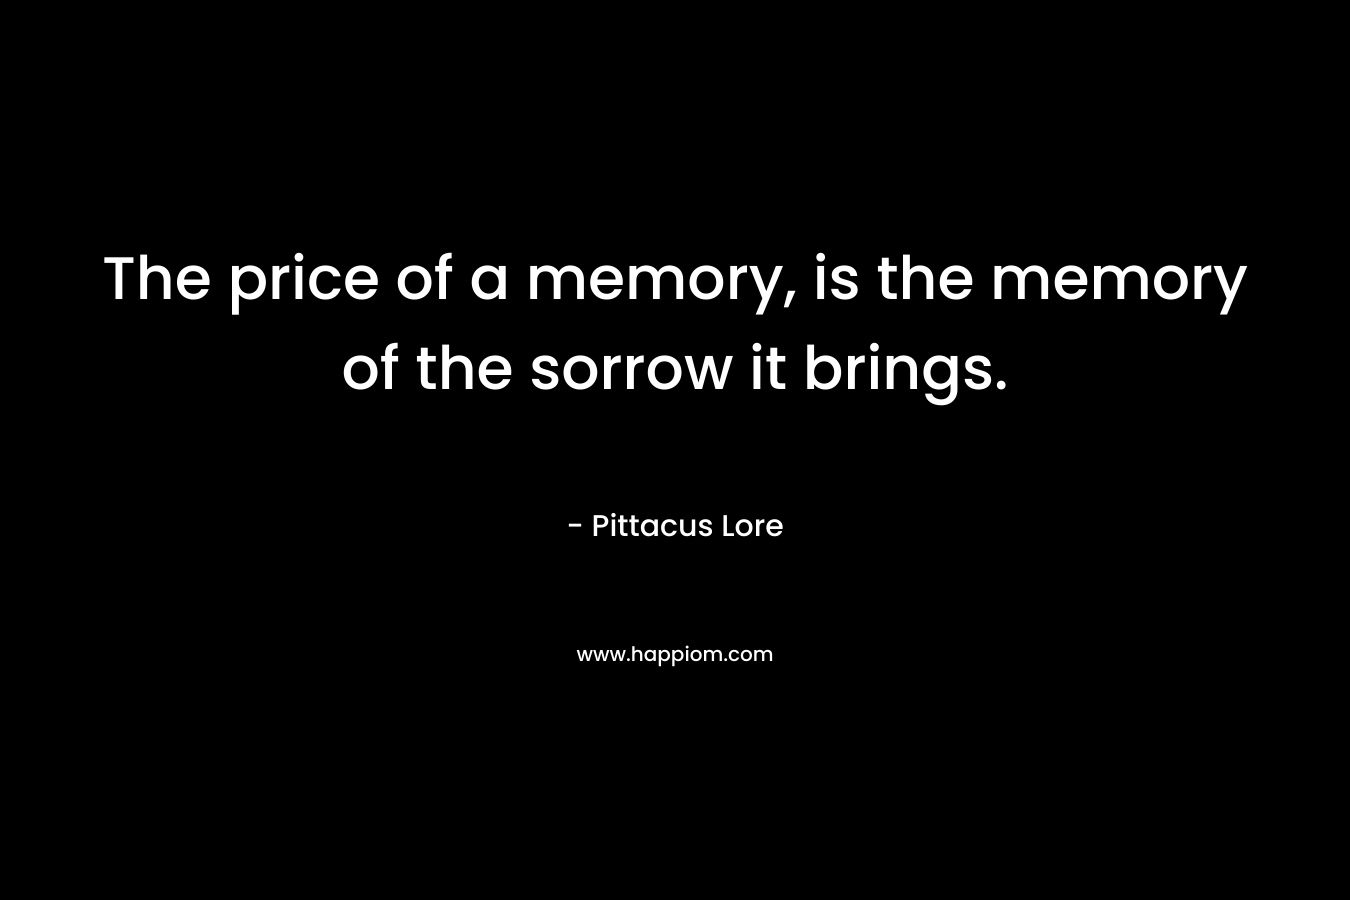 The price of a memory, is the memory of the sorrow it brings.